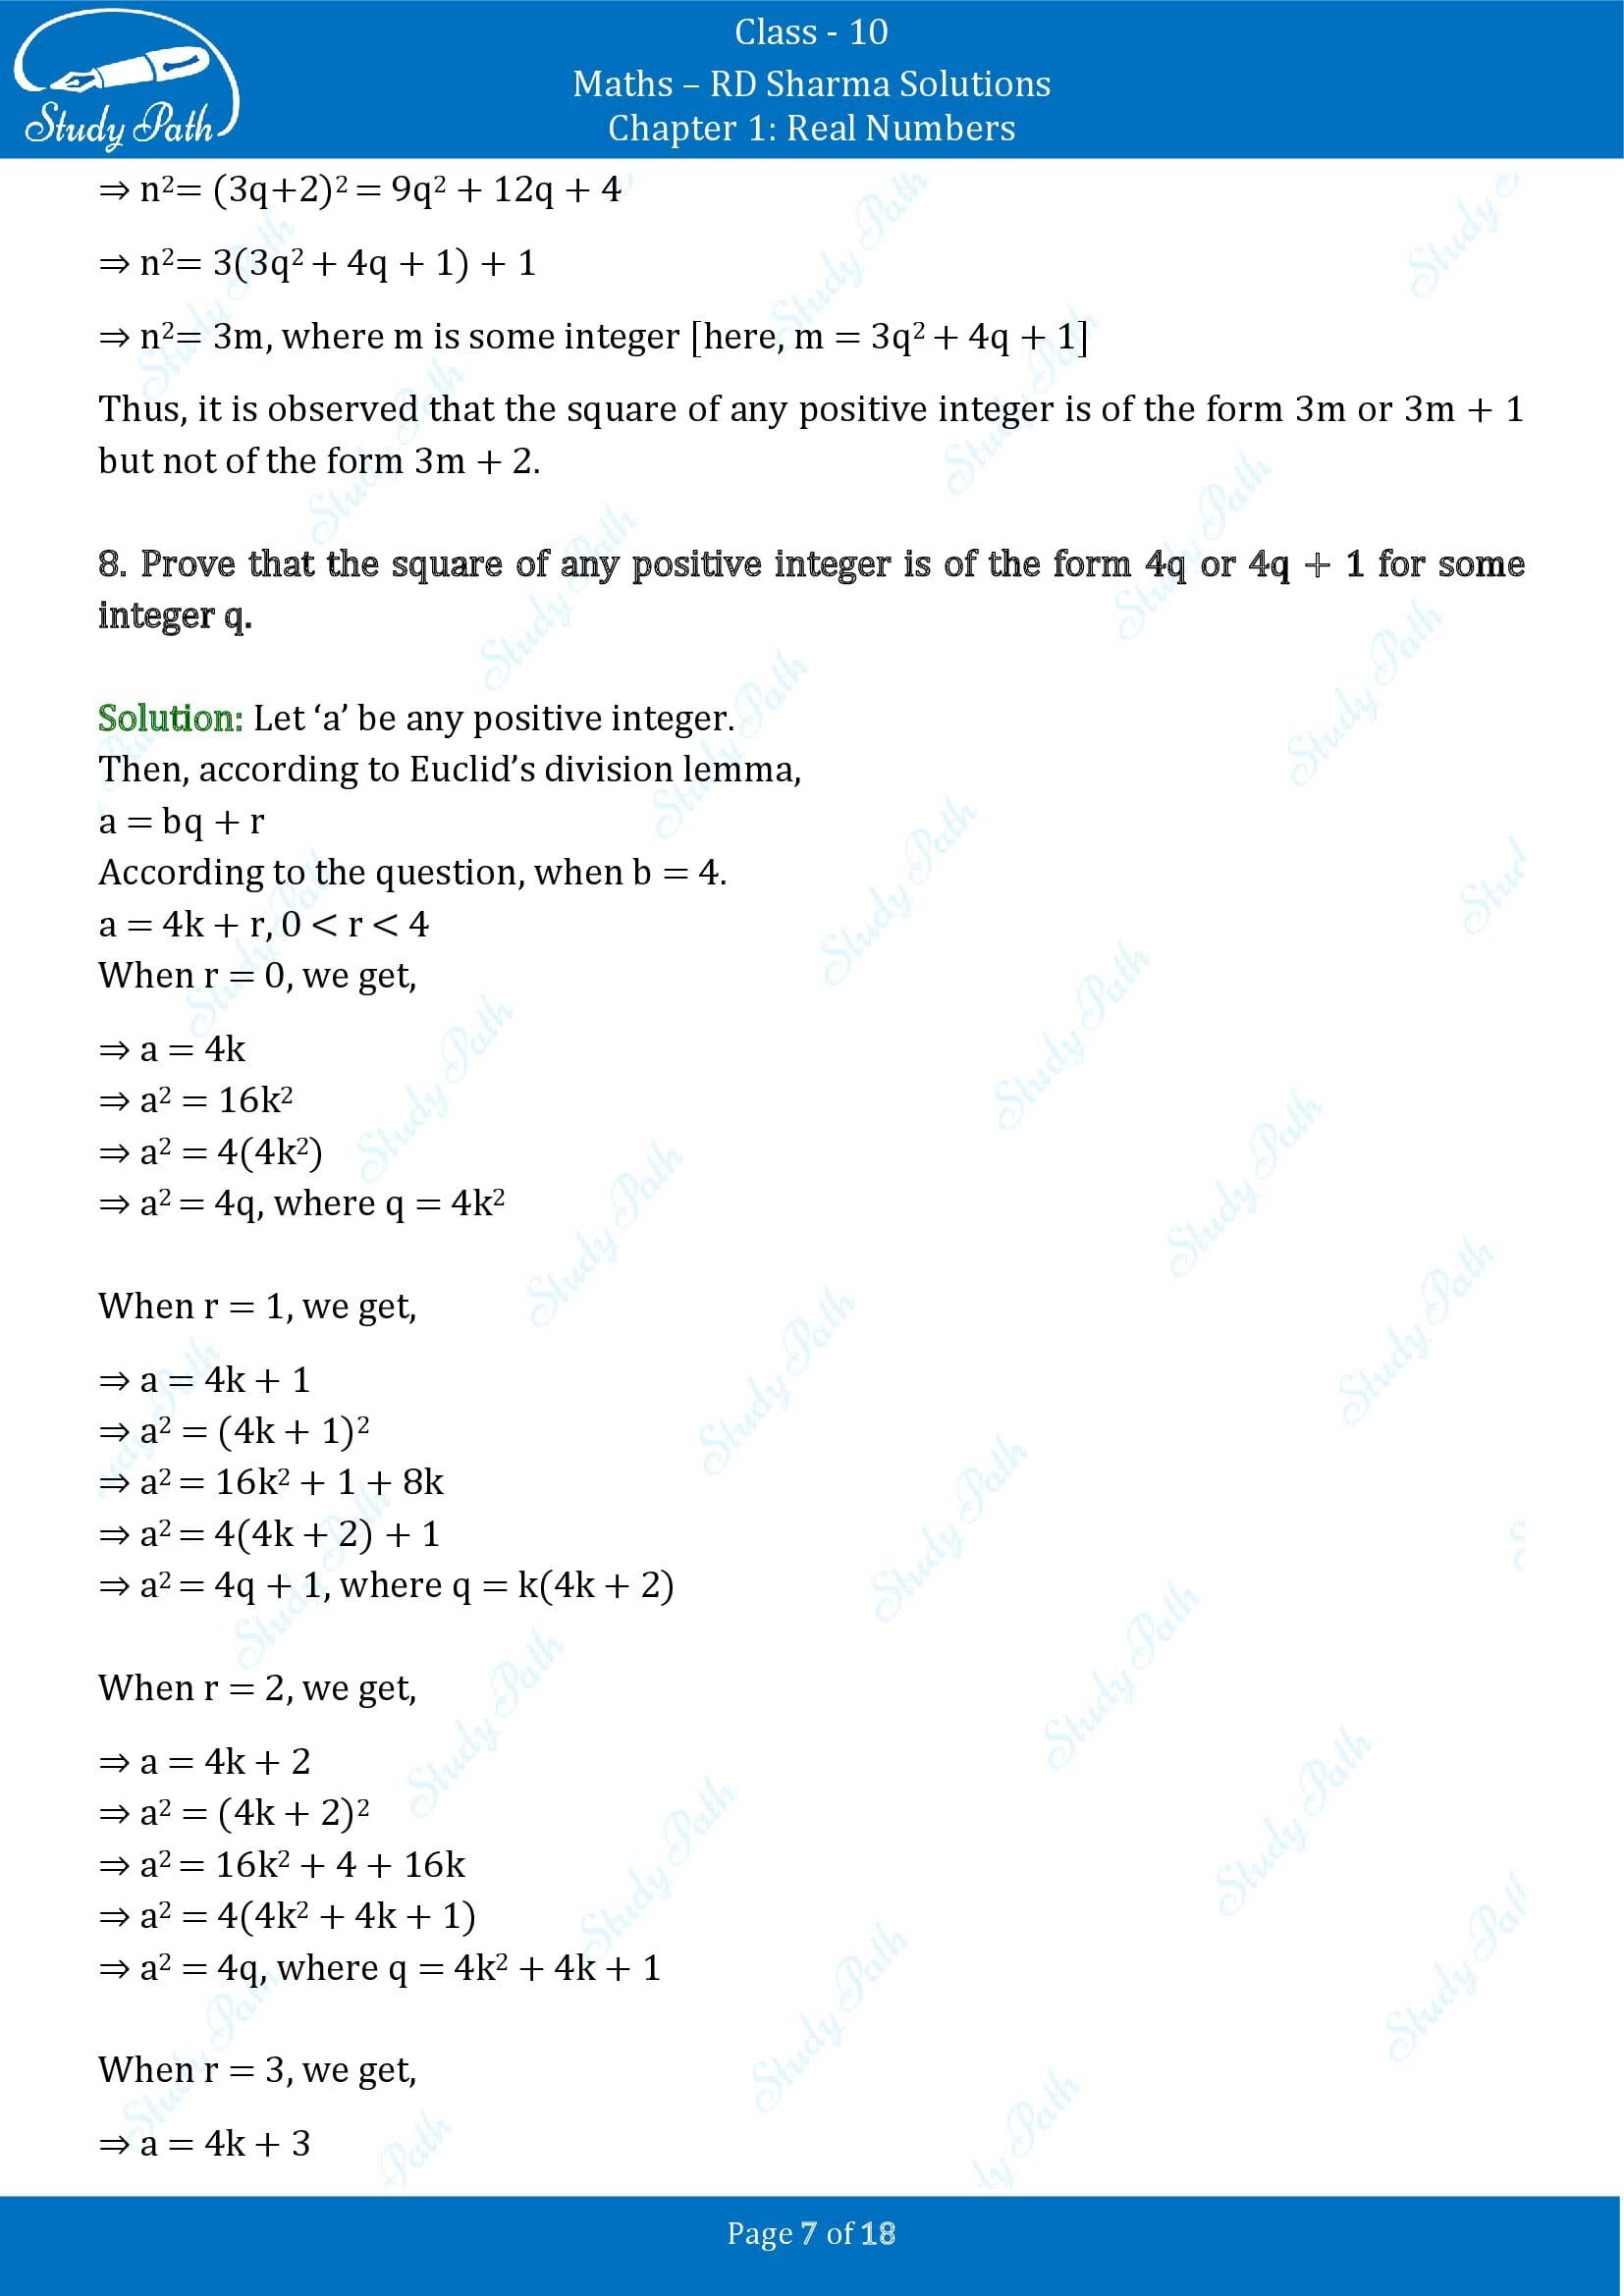 RD Sharma Solutions Class 10 Chapter 1 Real Numbers Exercise 1.1 00007